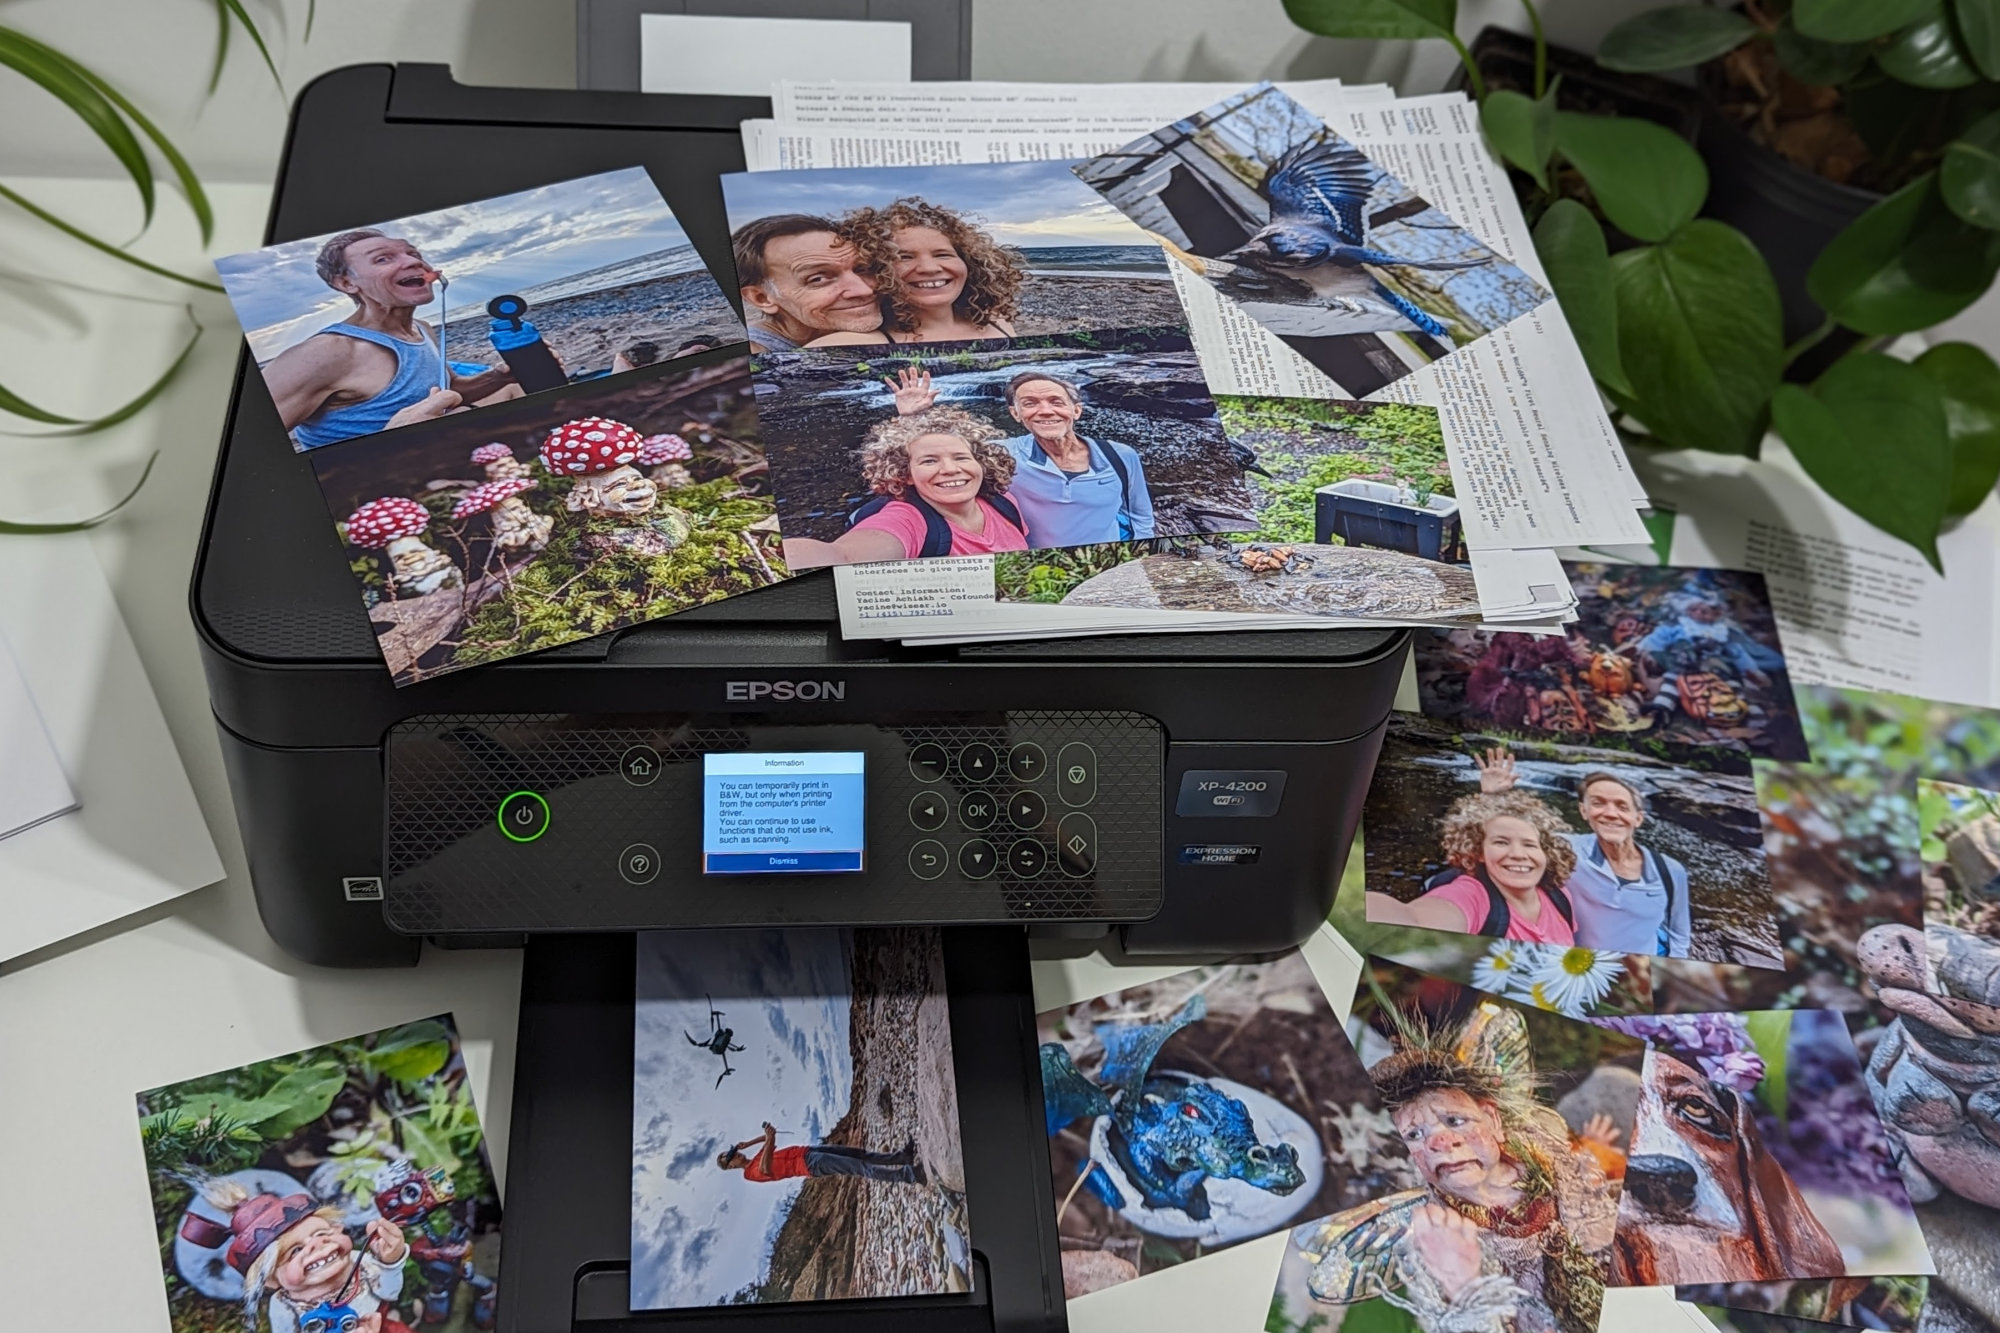 The Epson Expression Home XP-4200 is a nice all-in-one printer for home use.